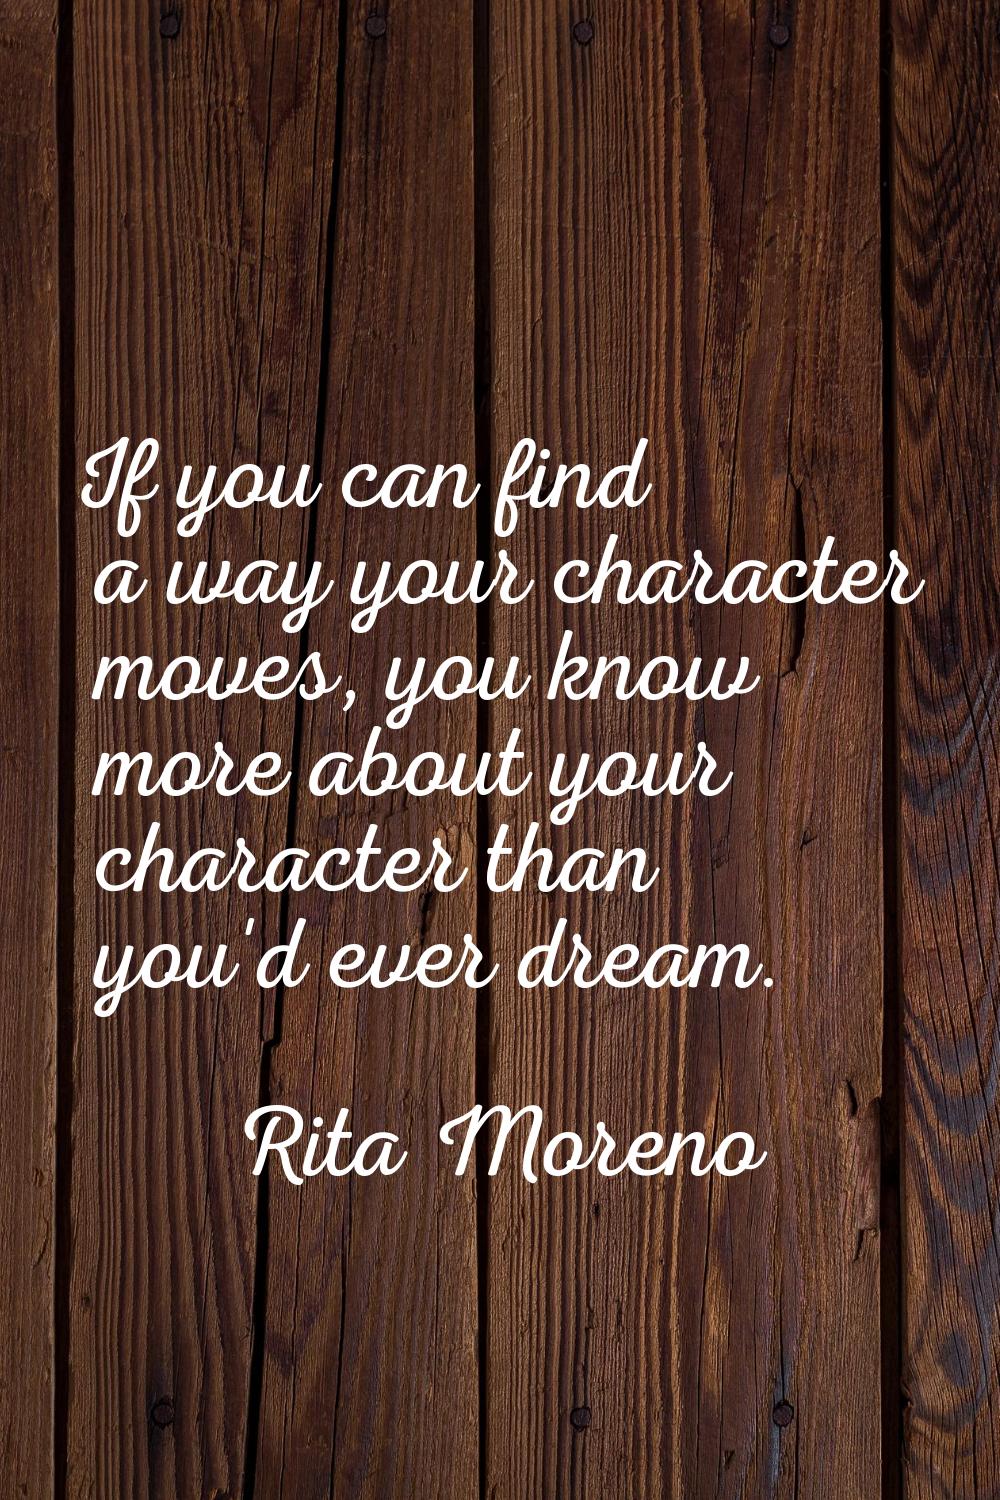 If you can find a way your character moves, you know more about your character than you'd ever drea